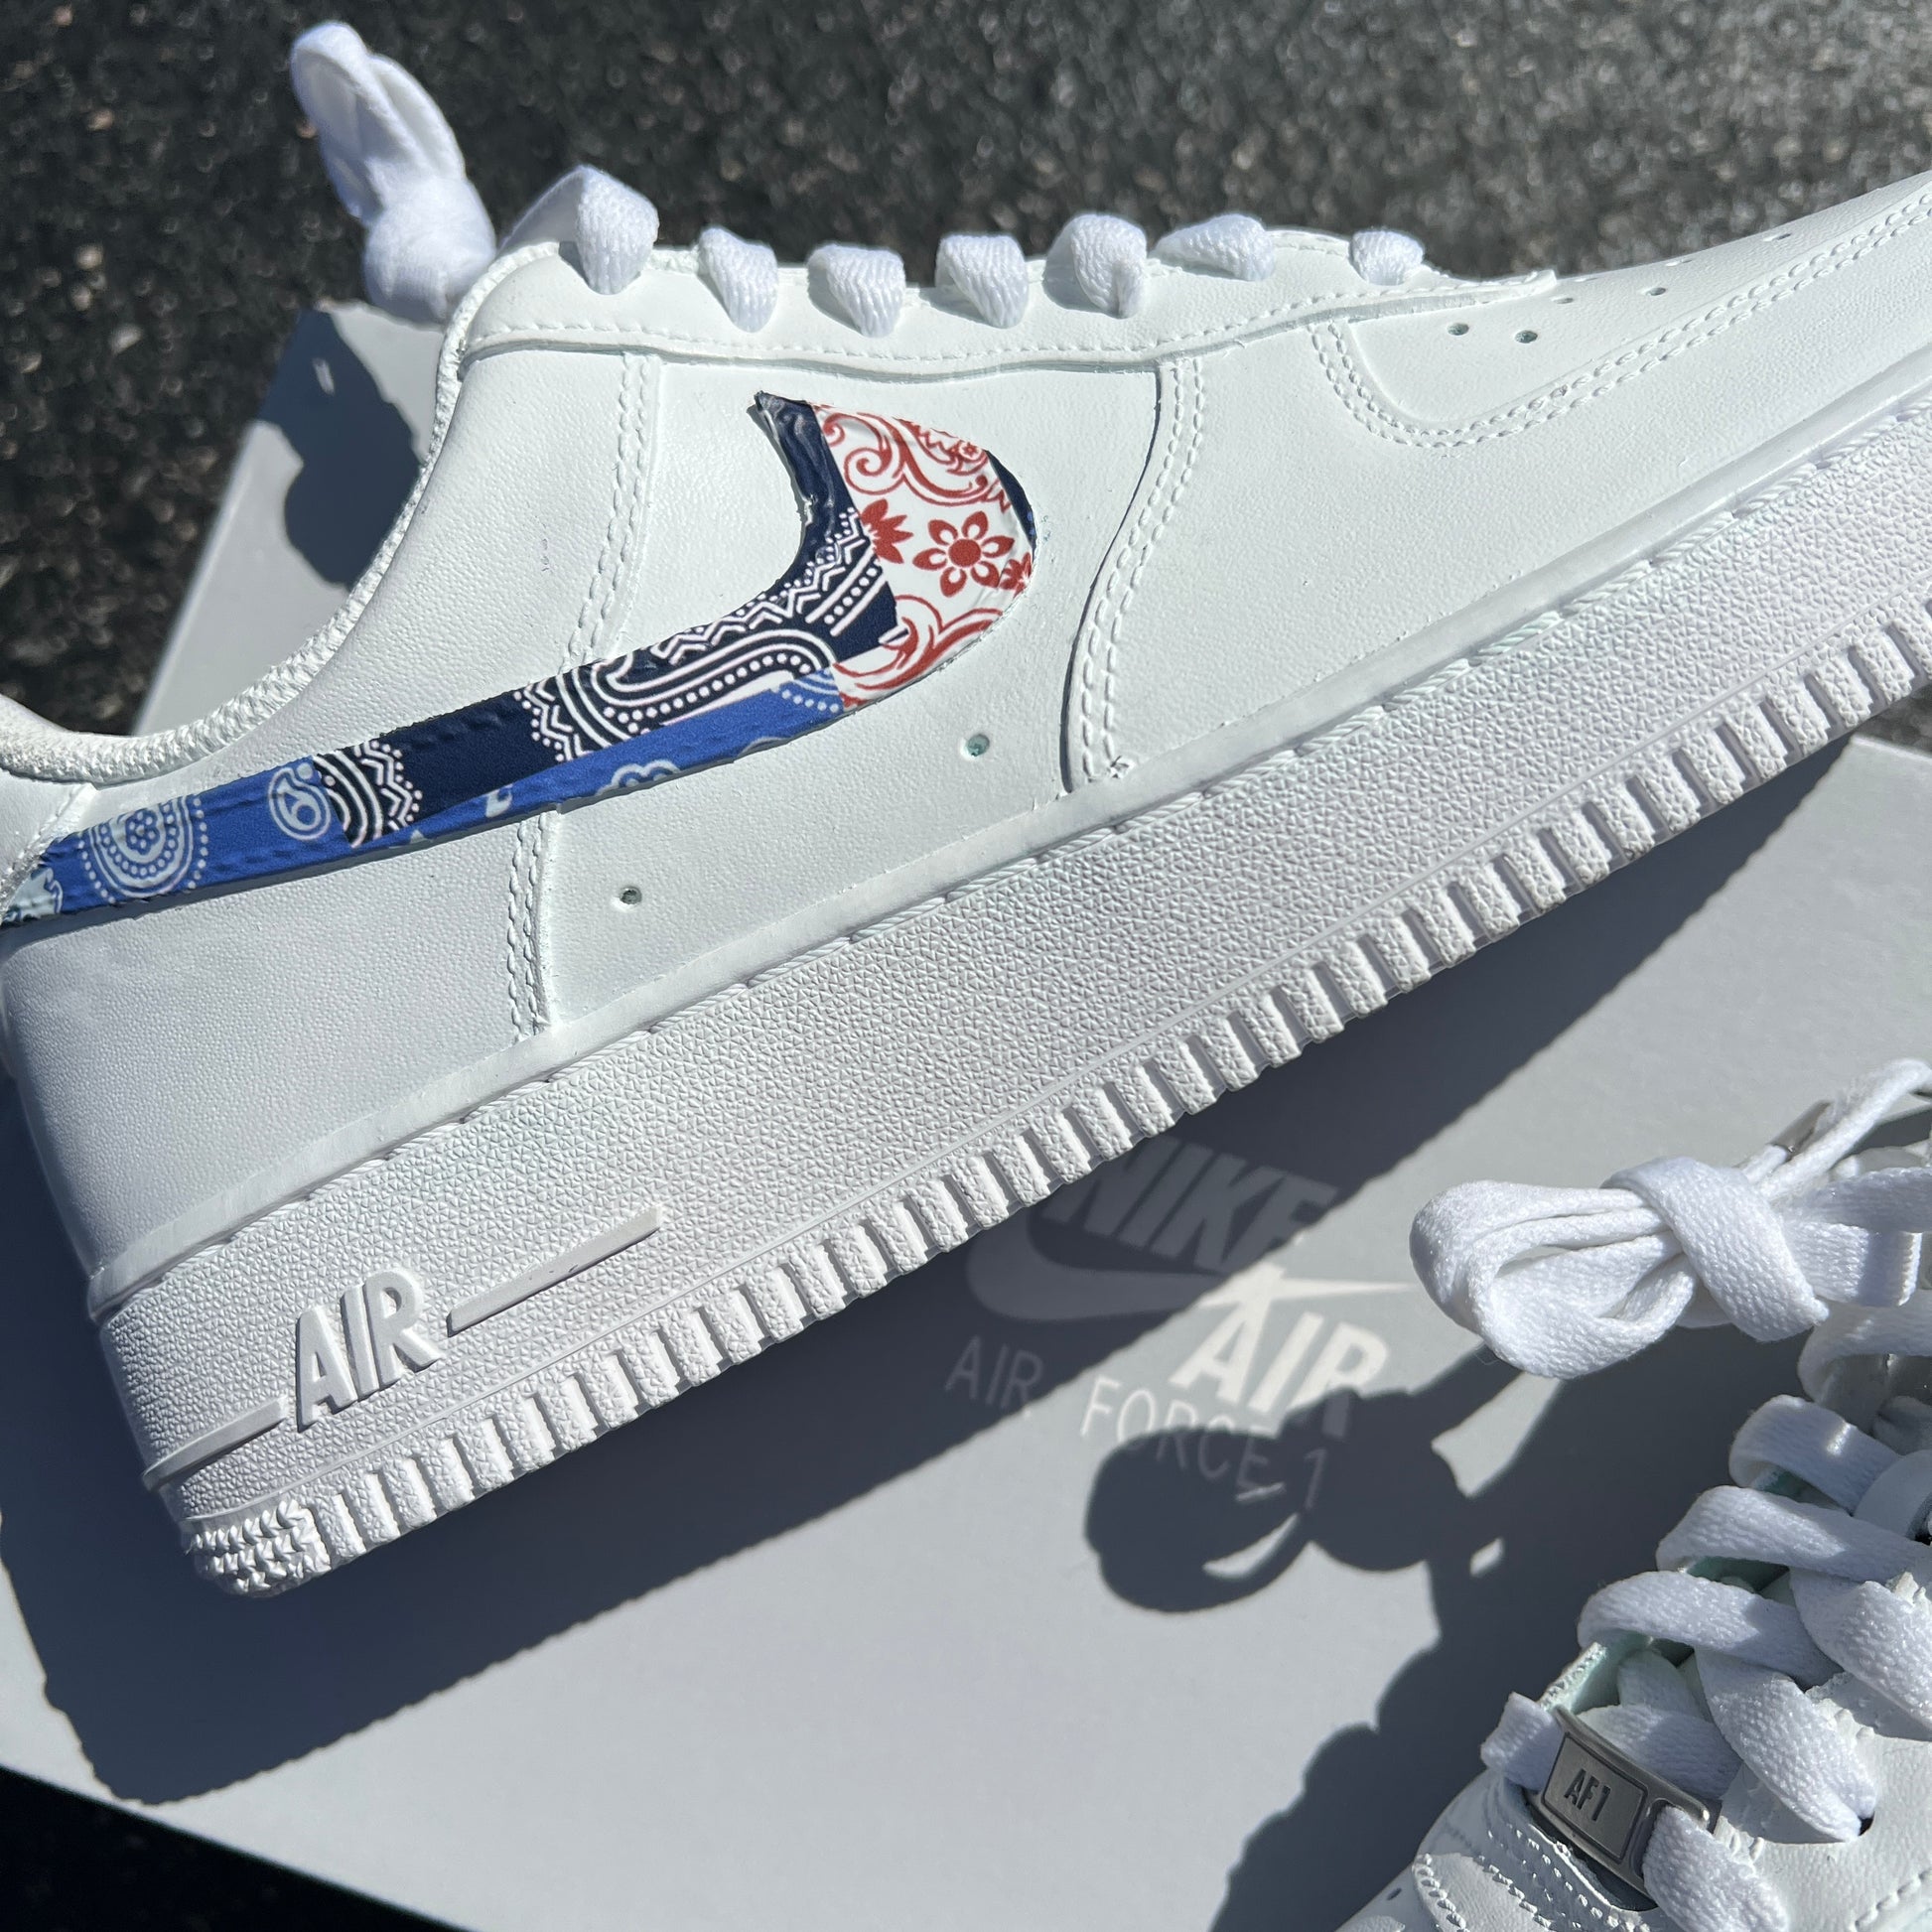 Blue Dripping Custom Air Force 1 Sneakers 13 M / 14.5 W